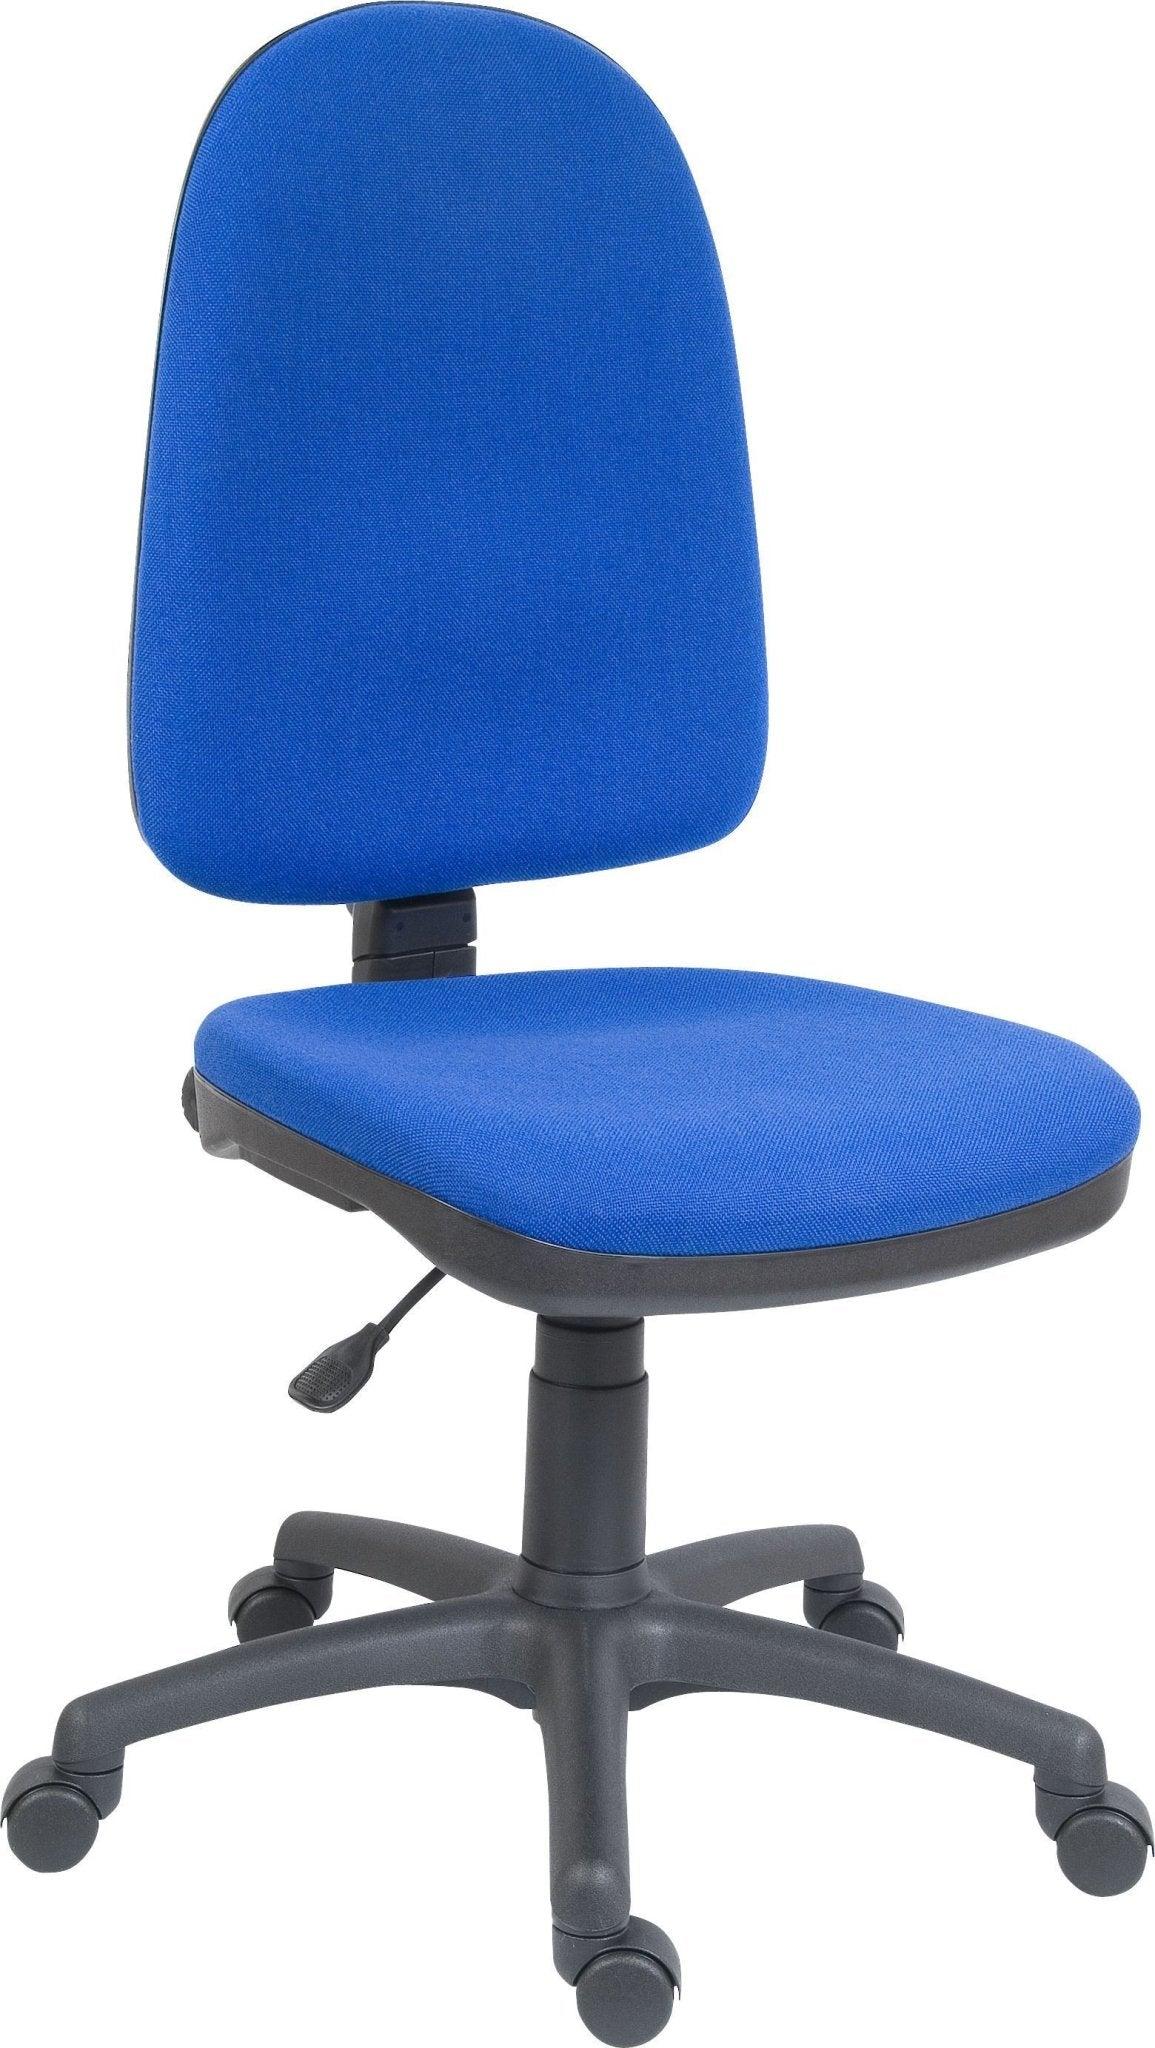 Price blaster high pc office chair (blue) - image 1